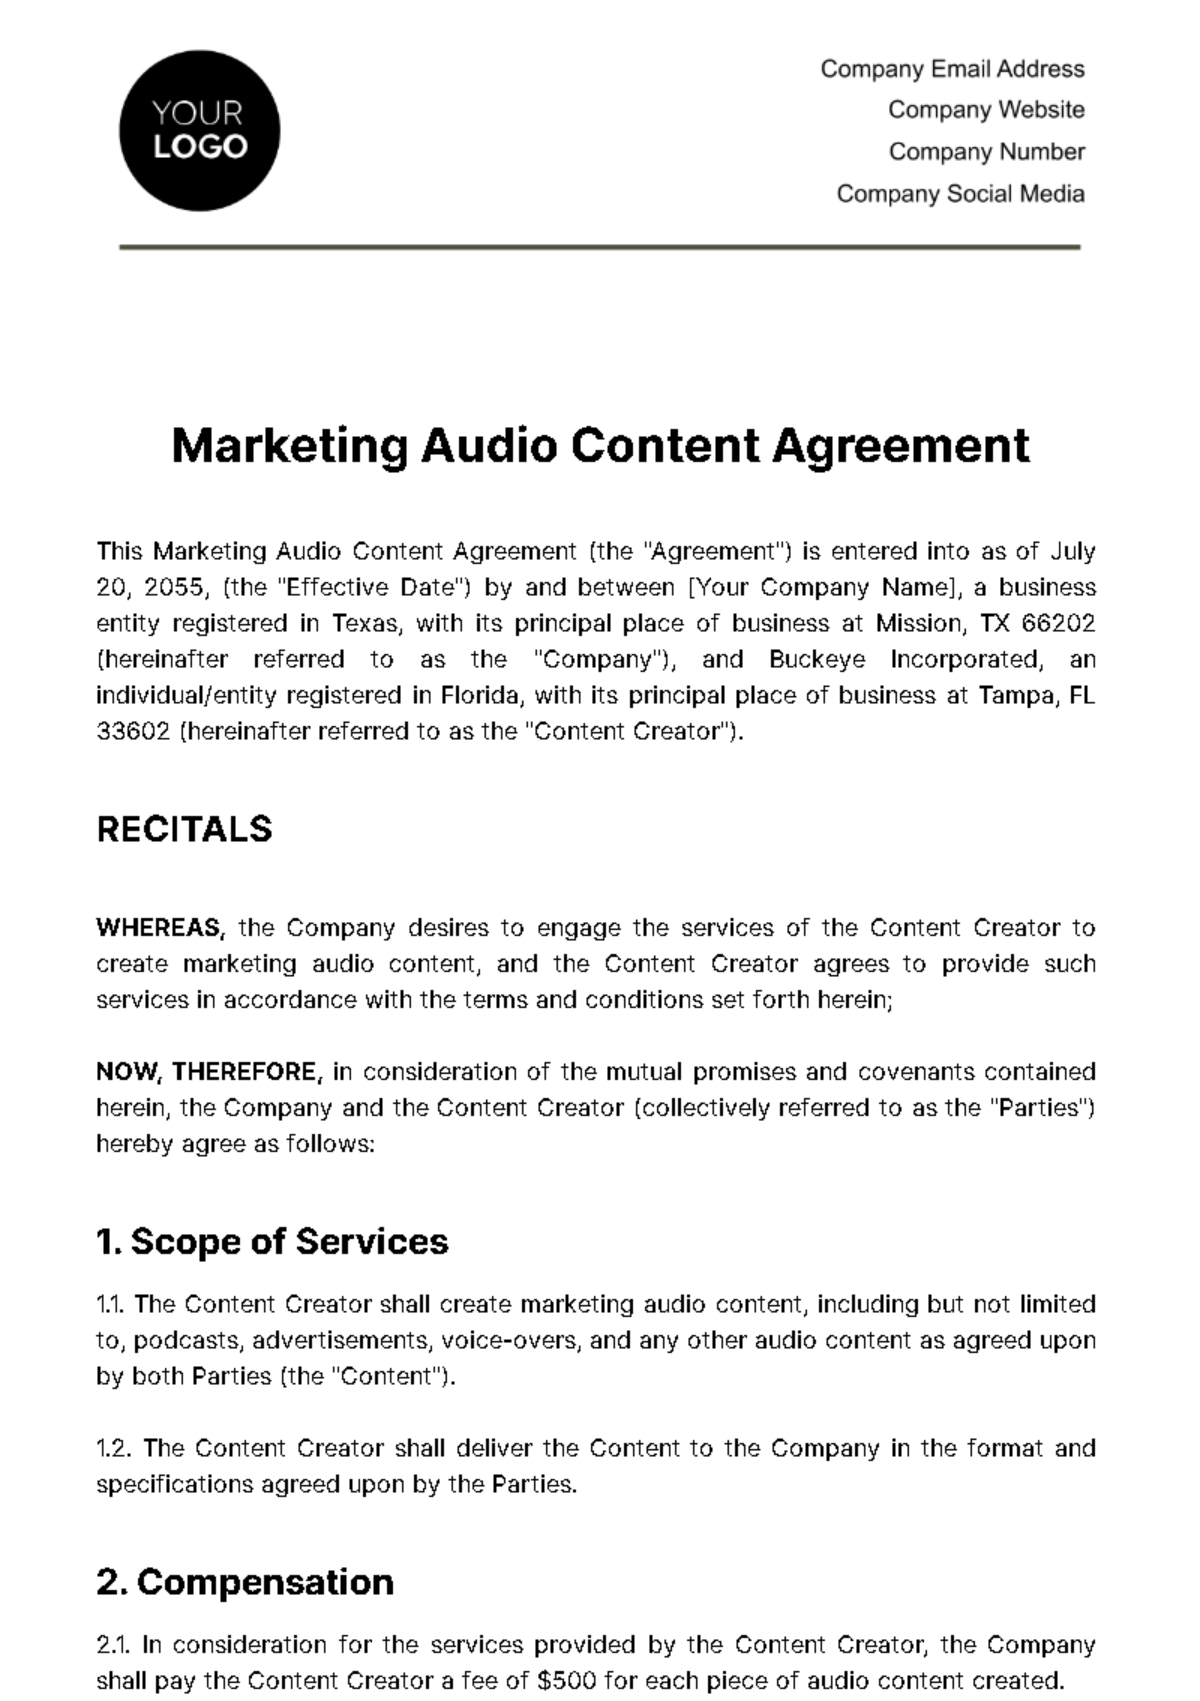 Marketing Audio Content Agreement Template